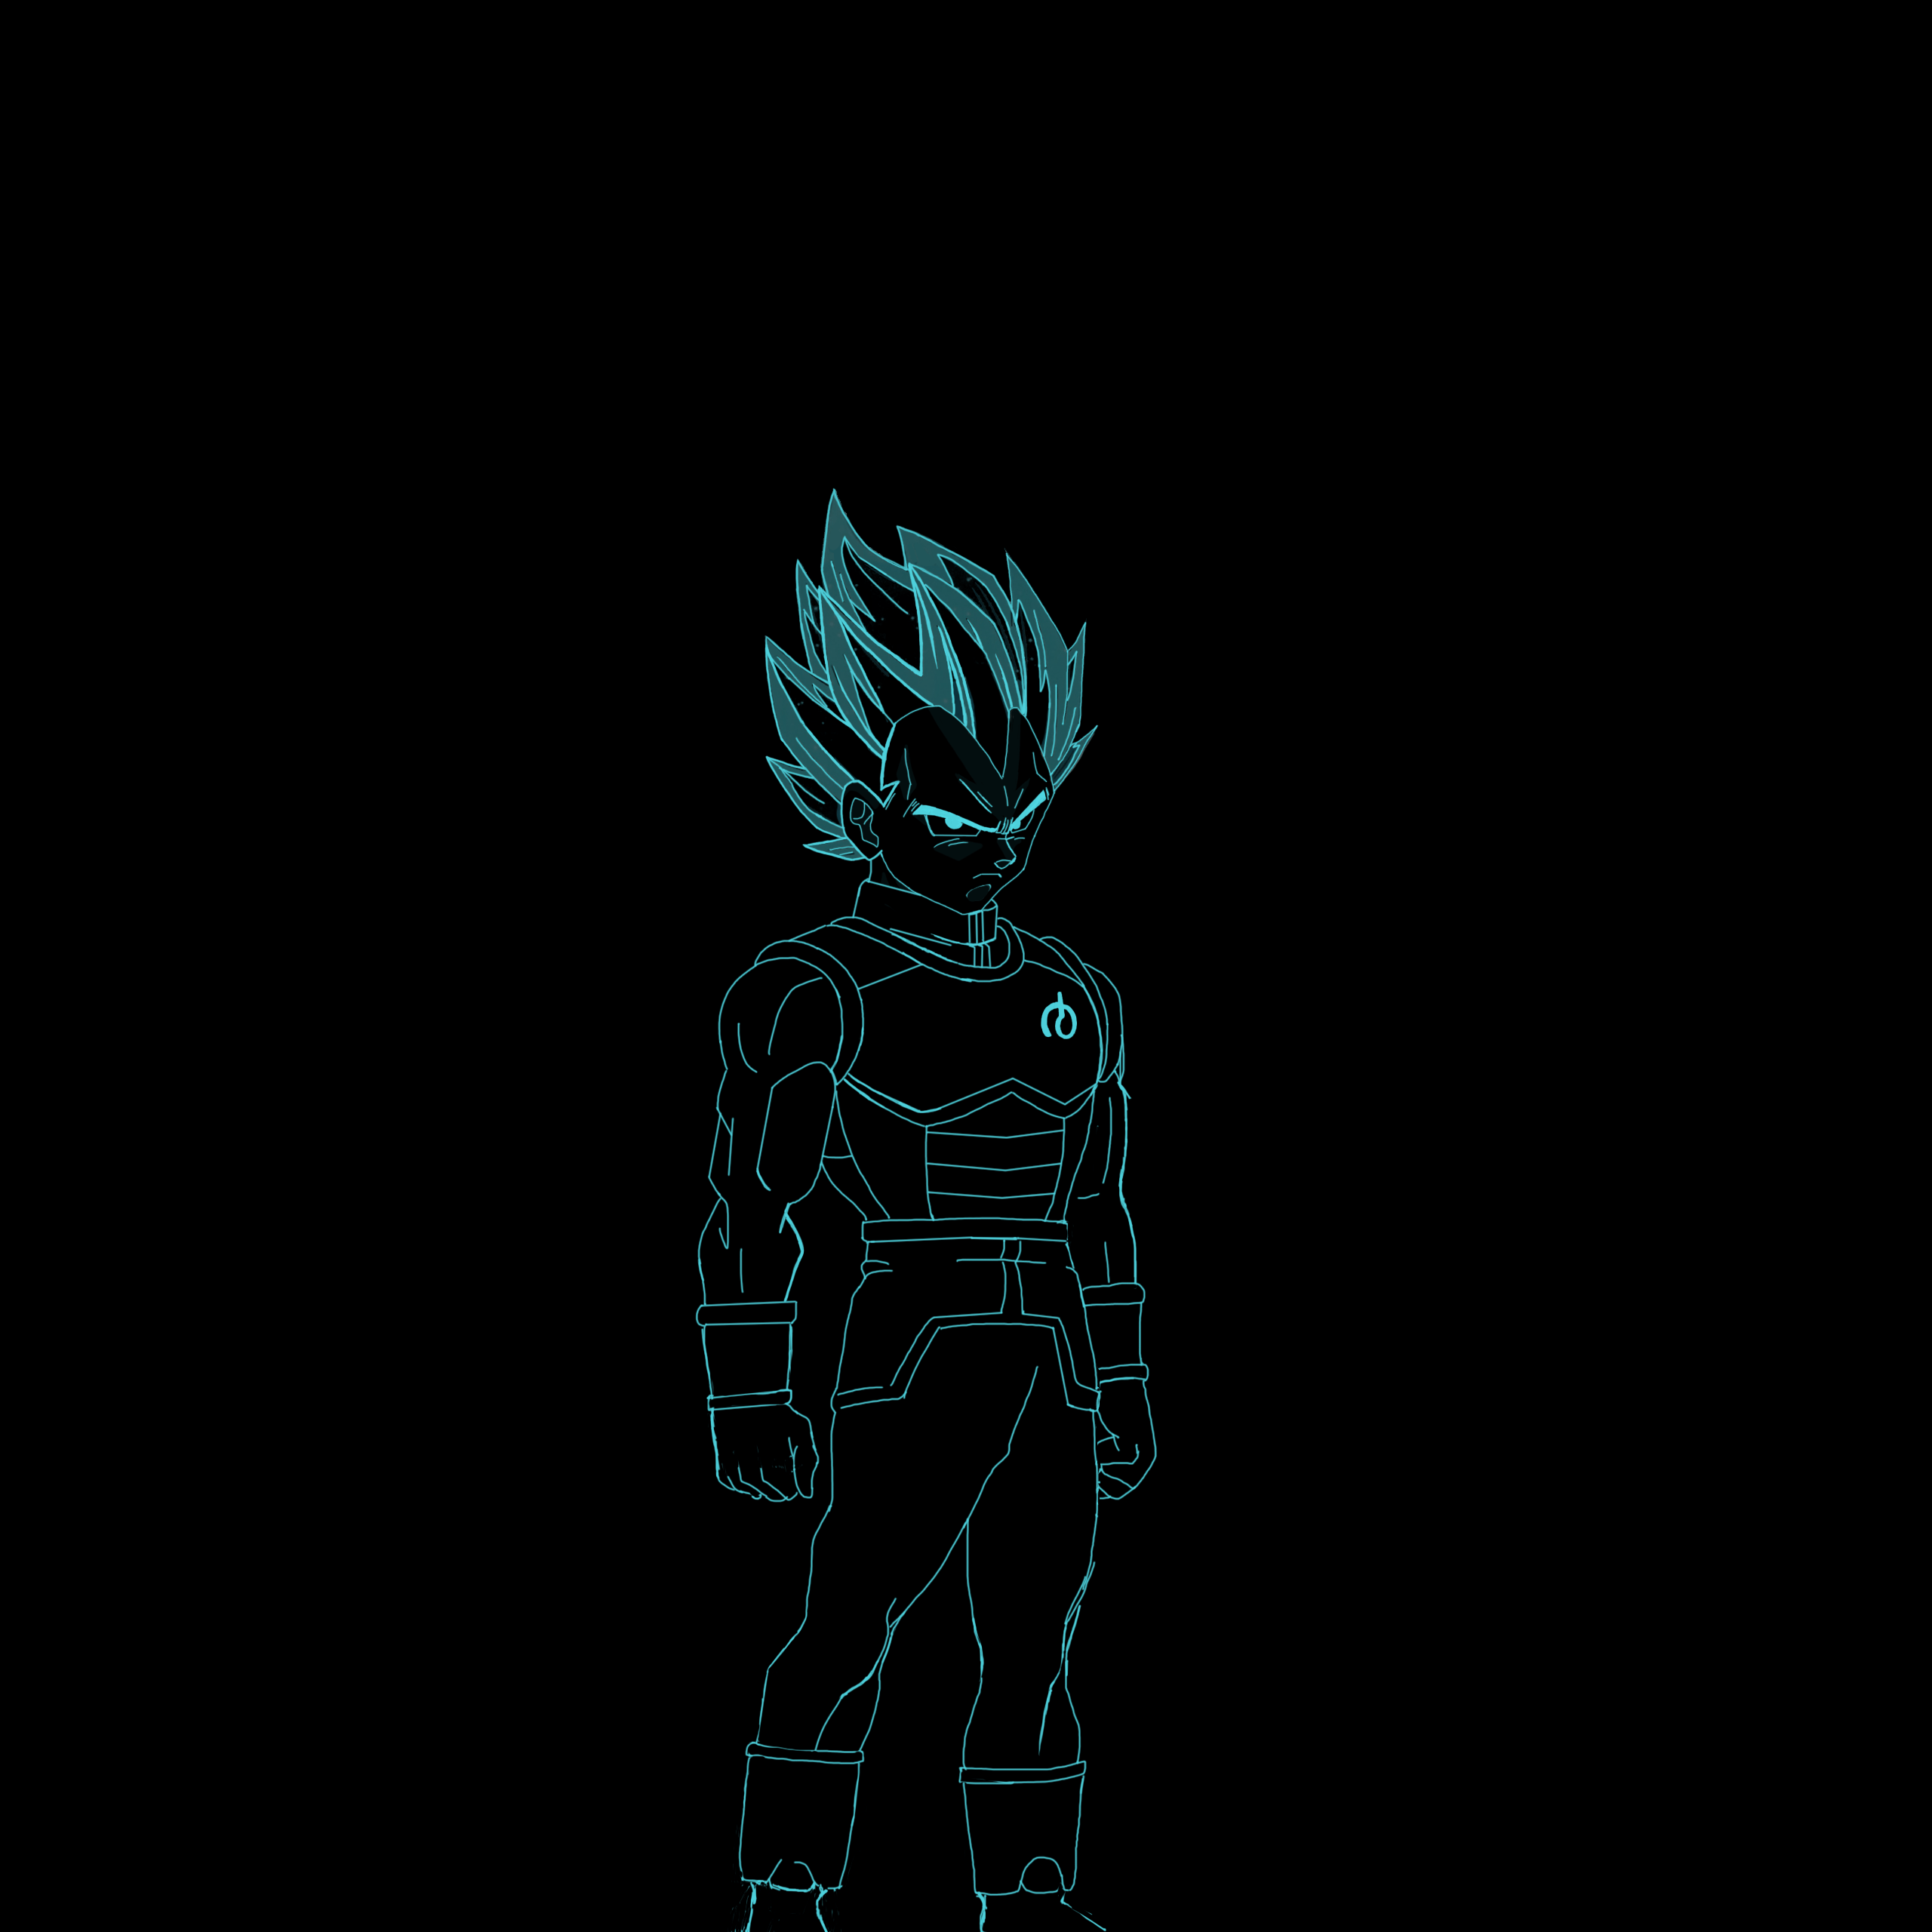 I made a wallpaper of SSGSS Vegeta for my Nexus 6P in photohop